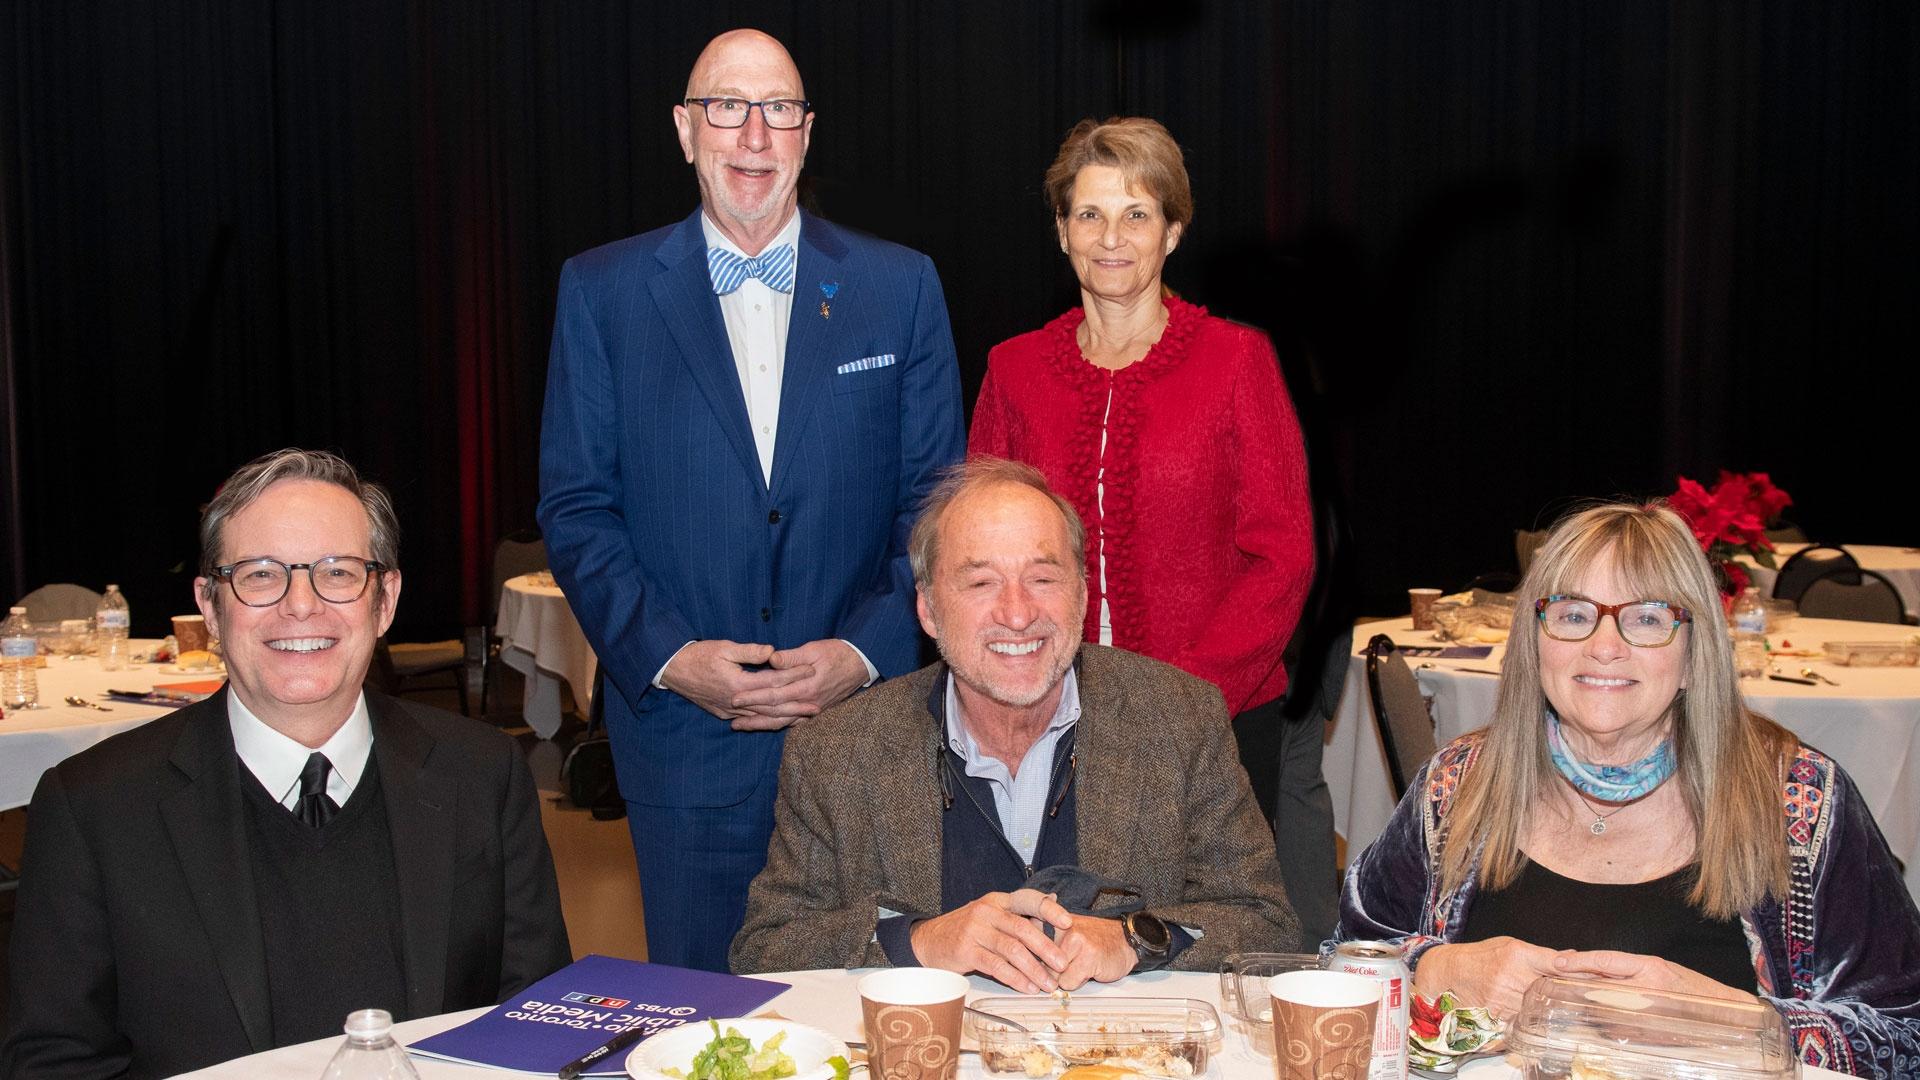 Drs. Phillip Glick and Drucy Borowitz (standing) along with Stephen Still and Terry Tucker (seated) enjoy meeting new President and CEO Tom Calderone (far left)